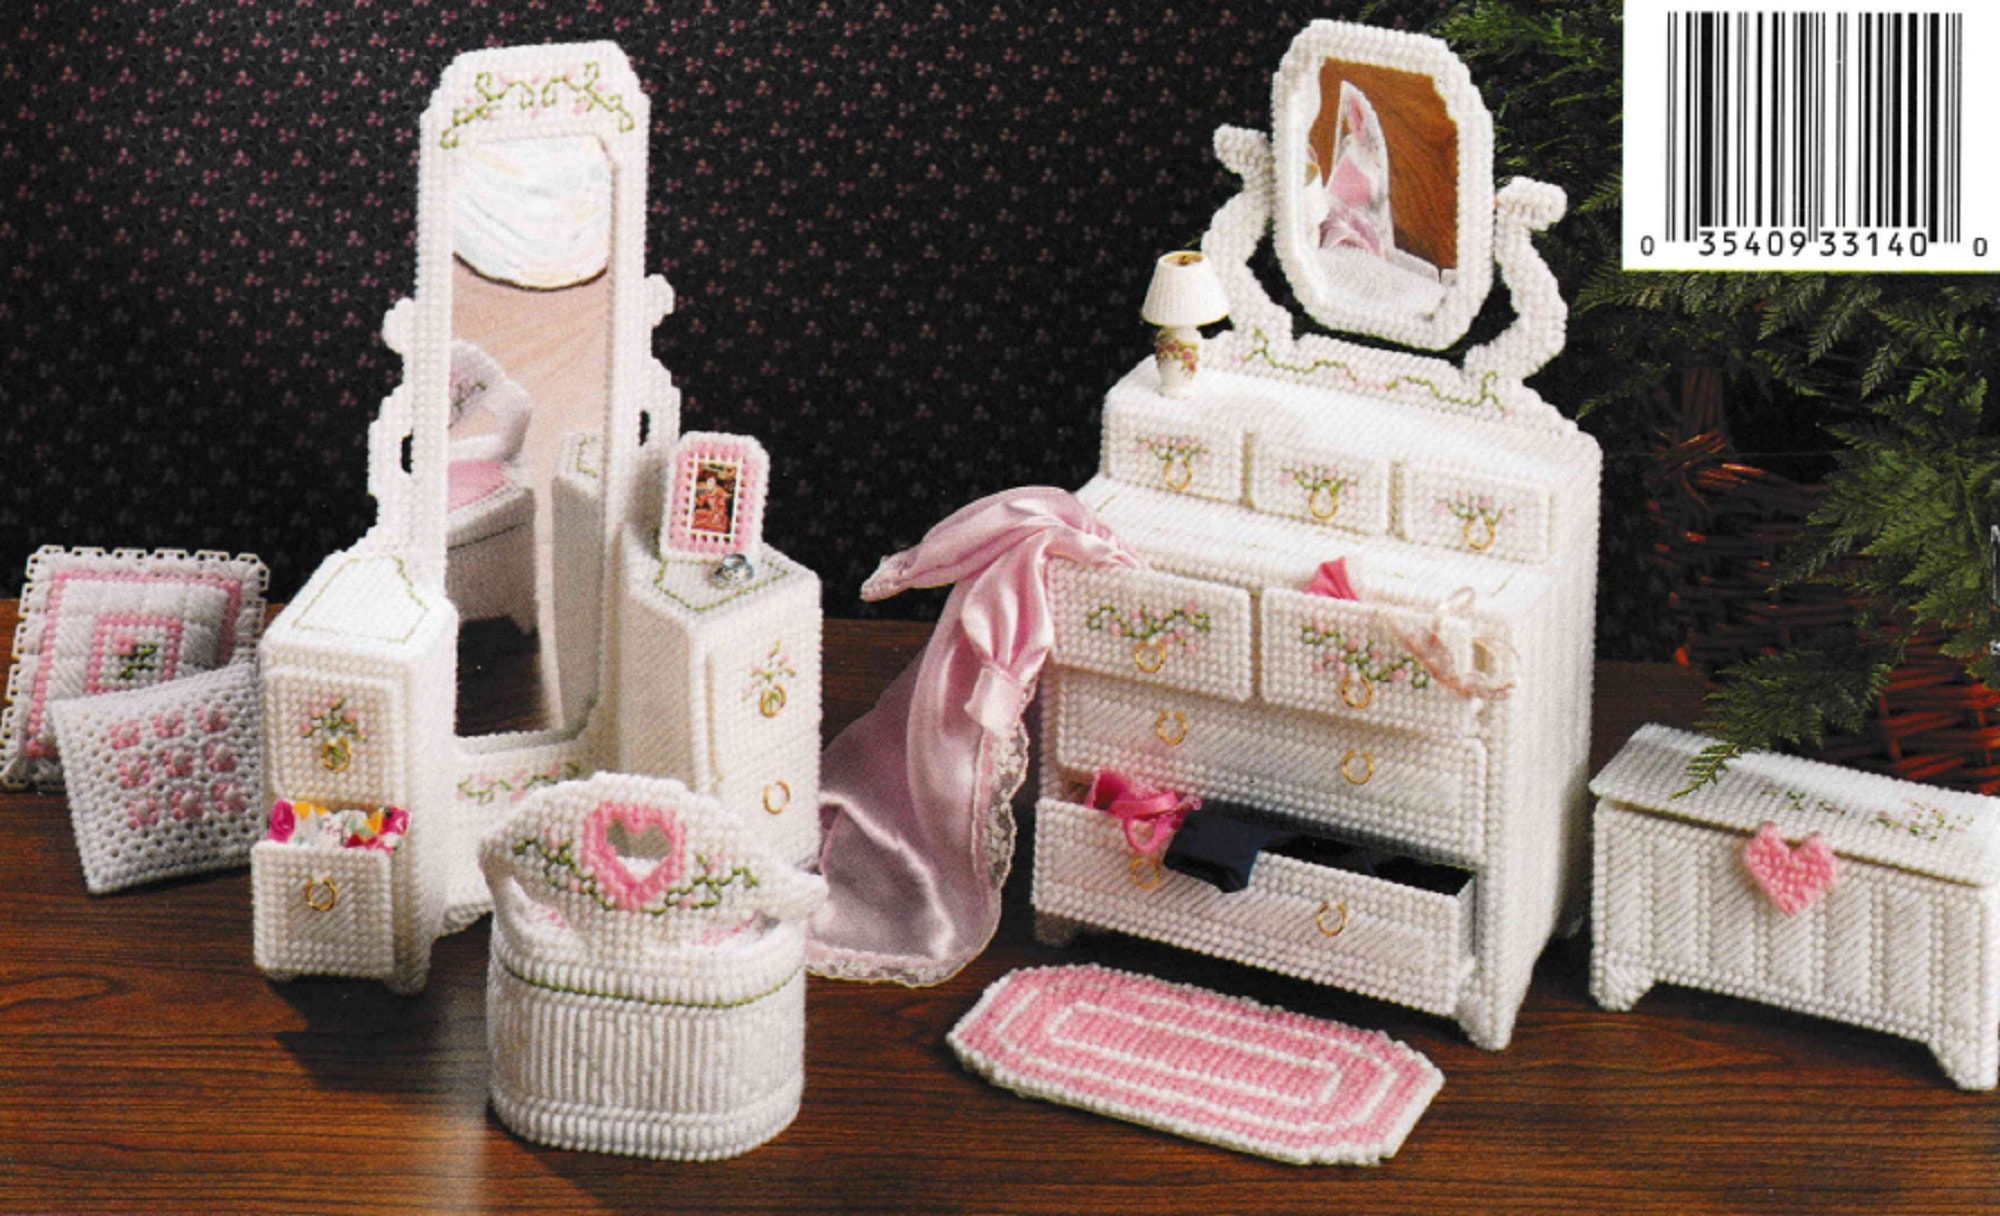 Barbie Furniture Plastic Canvas Pattern PDF Download, Fashion Doll House  Bed Dresser Mirror Hope Chest Accessories Patterns. 